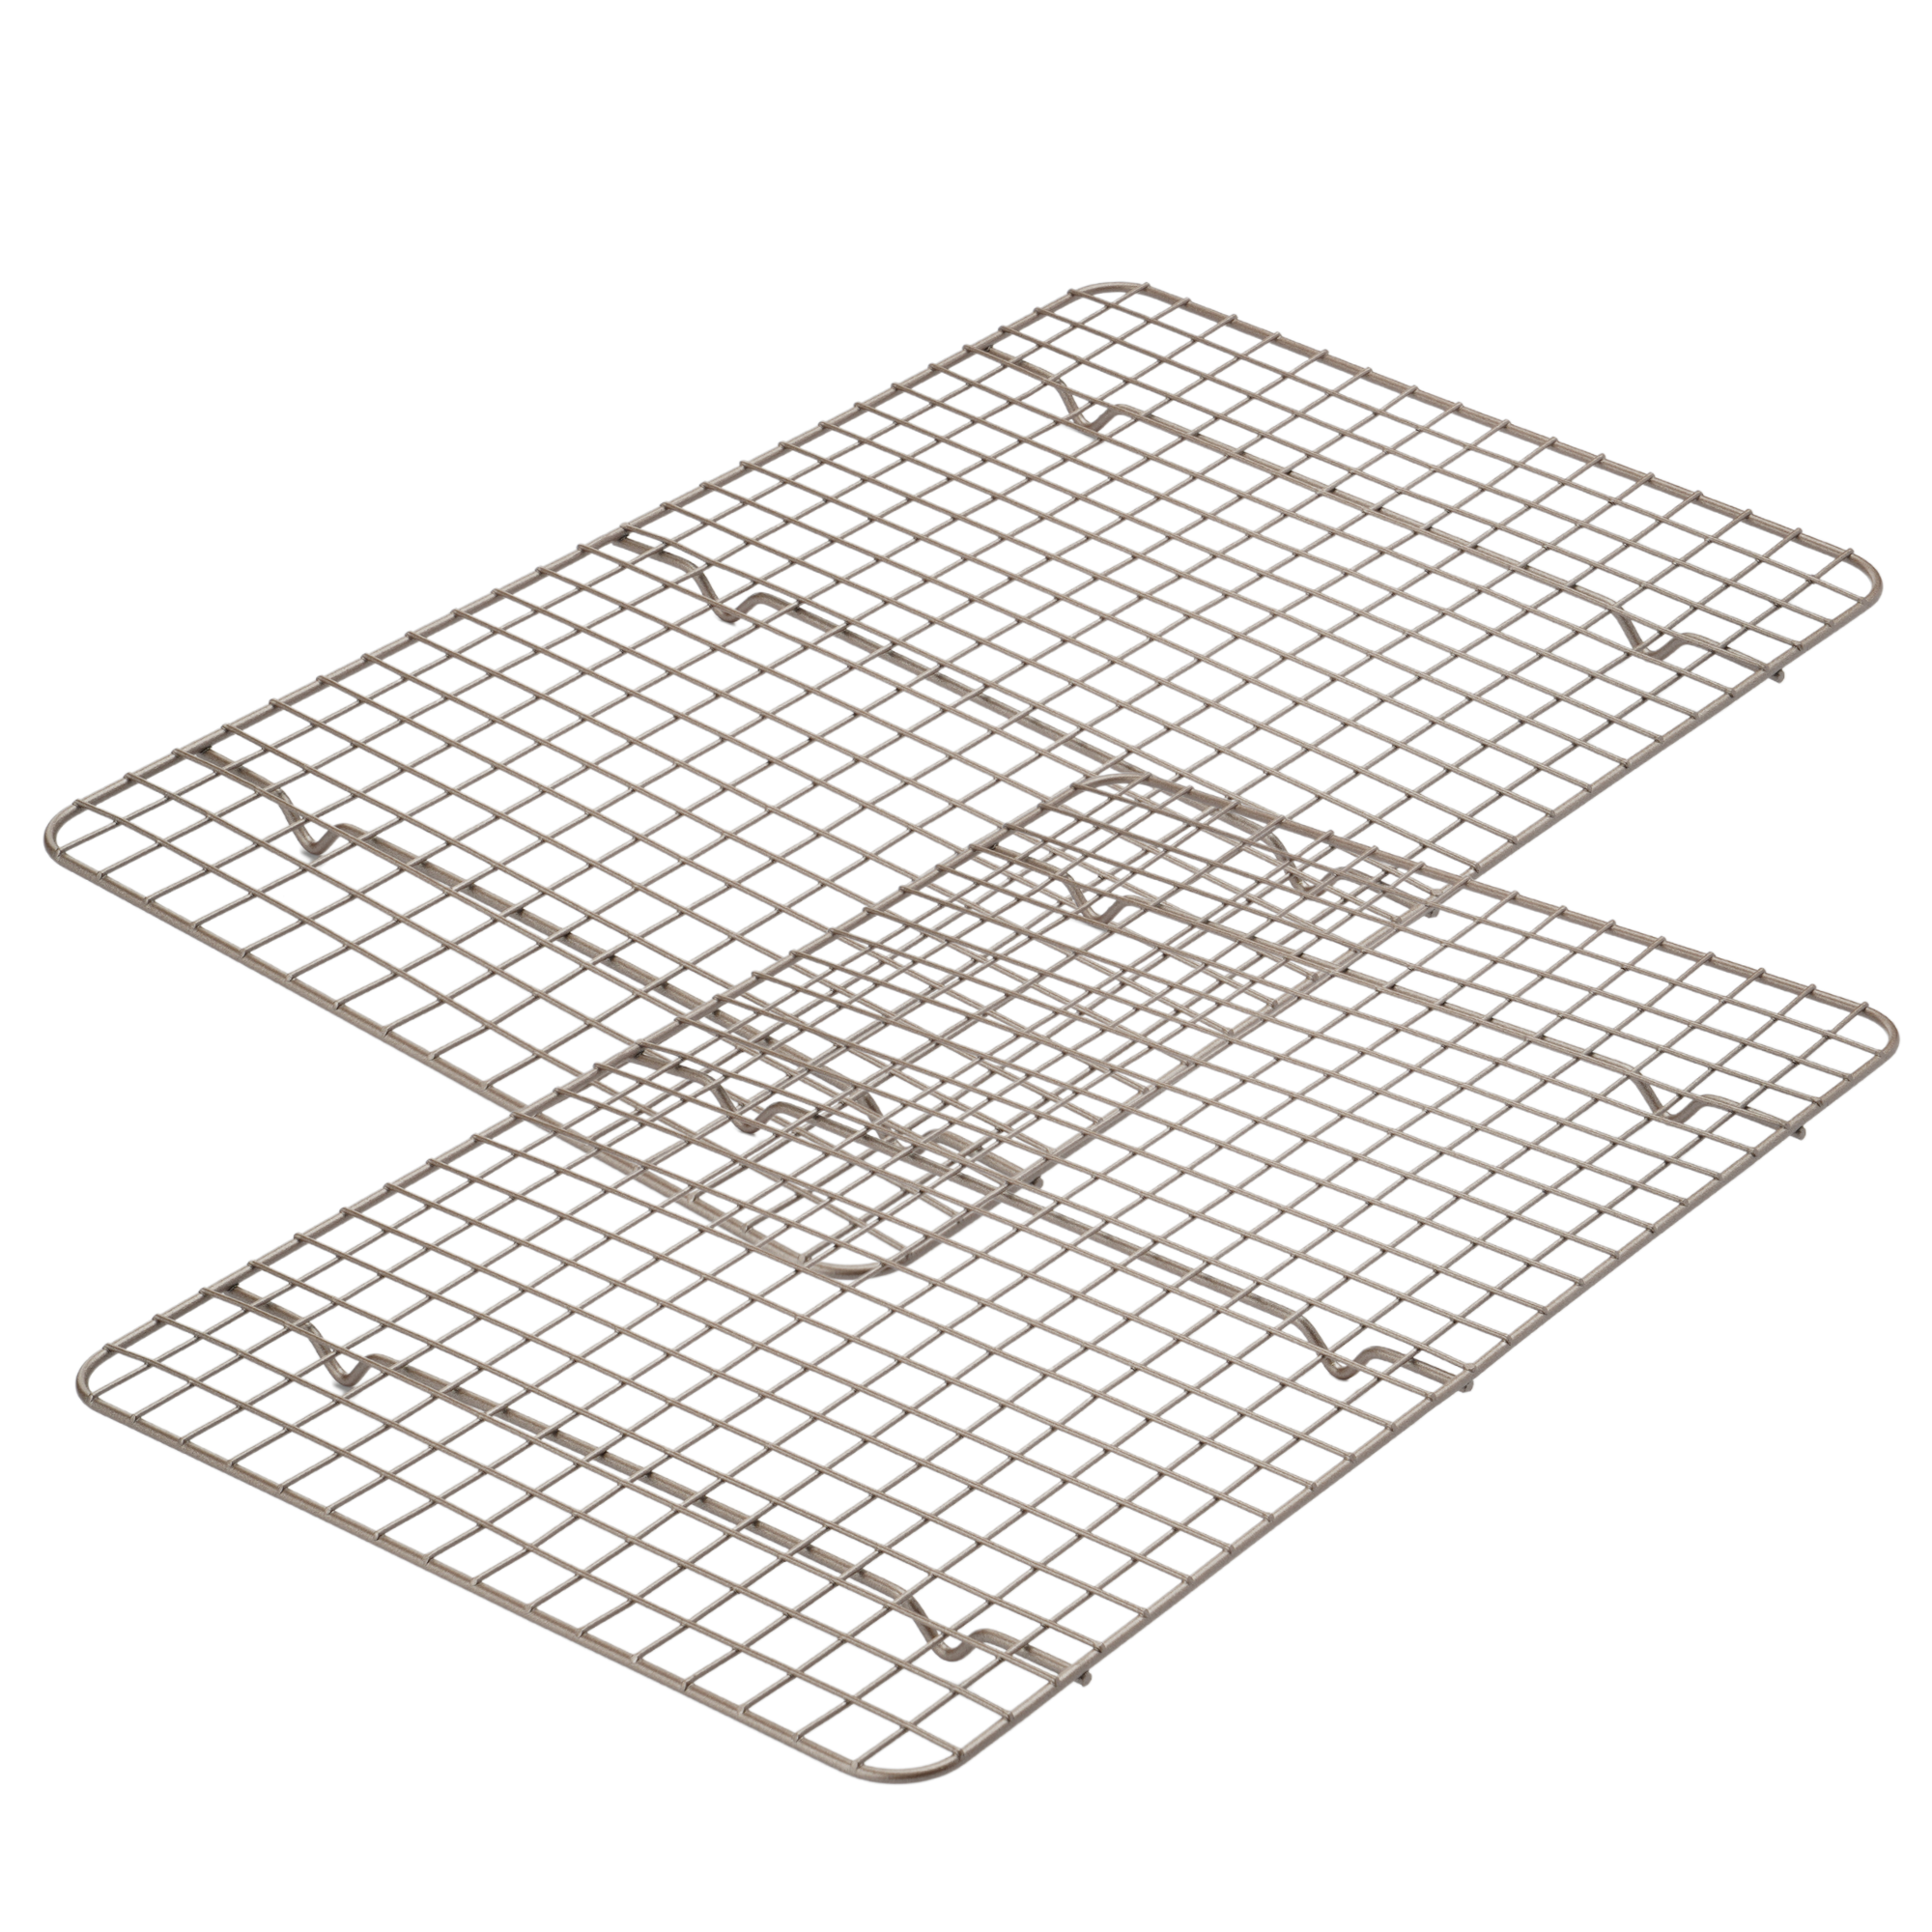 HAPPIELS 18'' Half Sheet 2-Pack with Cooling Rack Set of 2